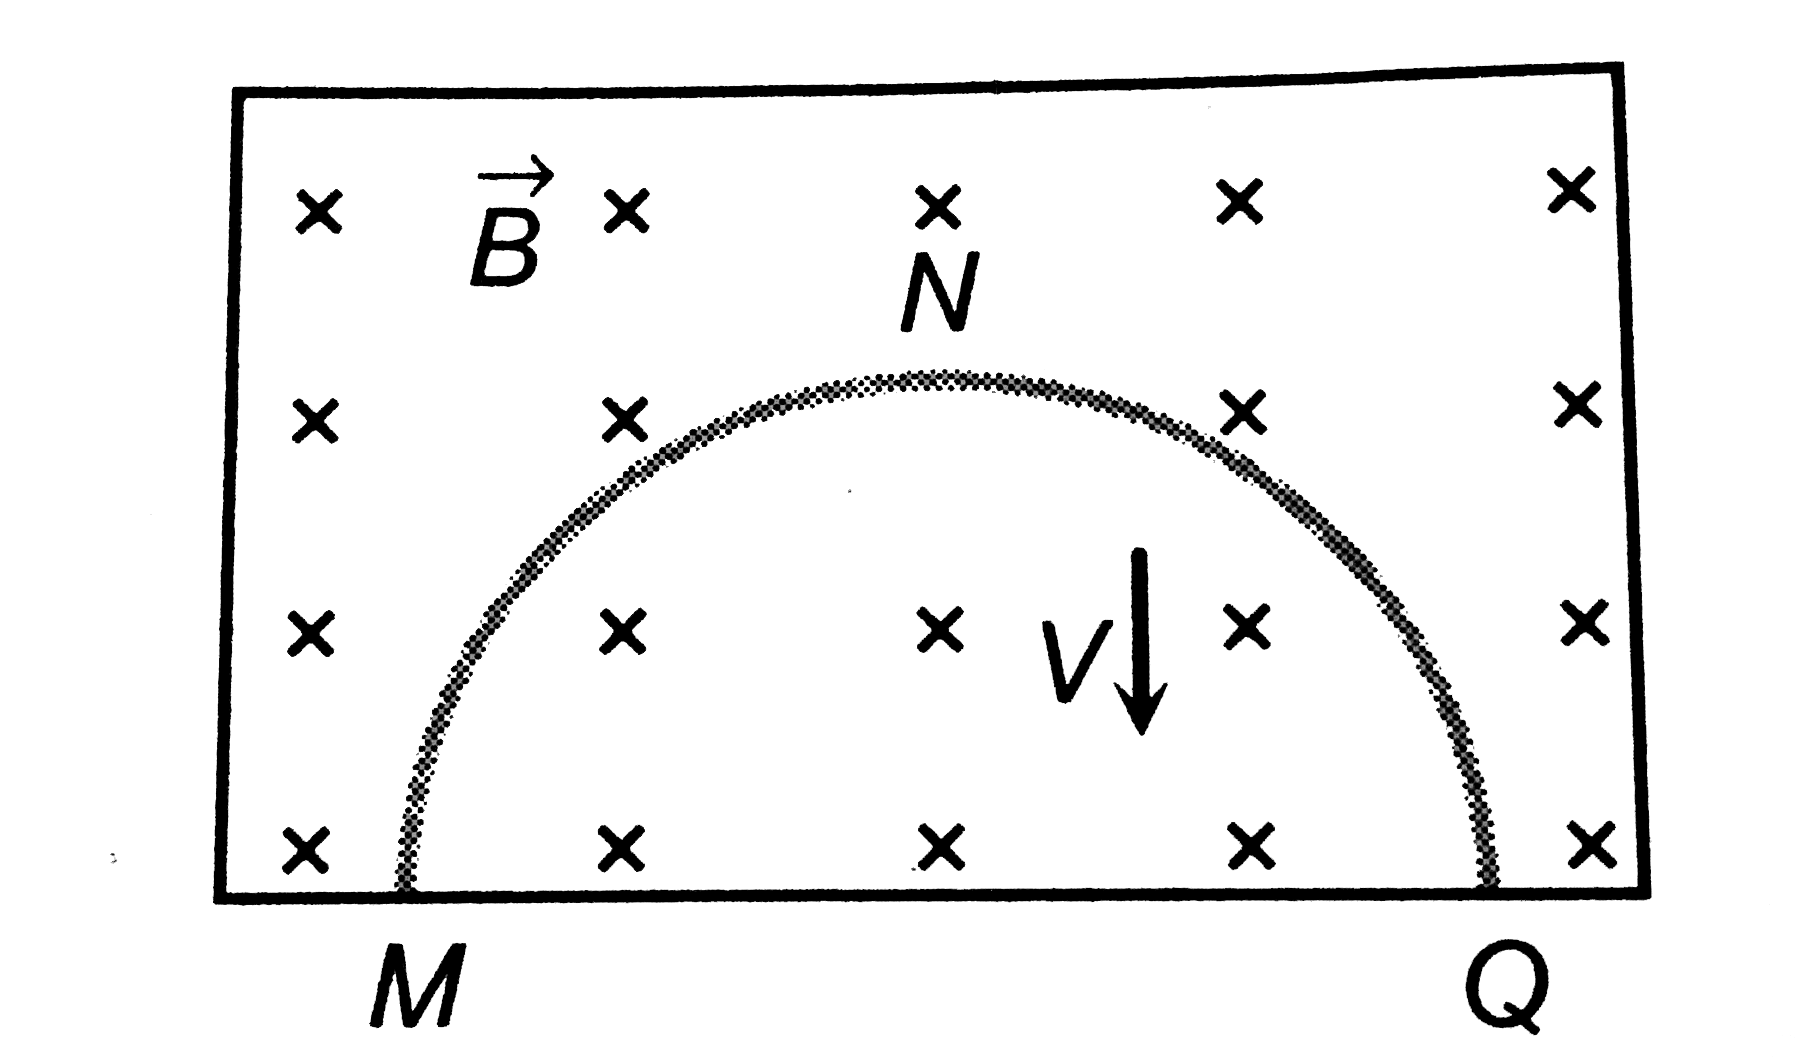 A thin semicircular conducting ring of radius R is falling with its plane verticle in a horizontal magnetic inducting B. At the position MNQ, the speed of the ring is V and the potential difference developed across the ring is    
 (1.) zero
 (2.)BcpiR^(2)//2
 (3.) piRBV 
 (4.) 2RBV